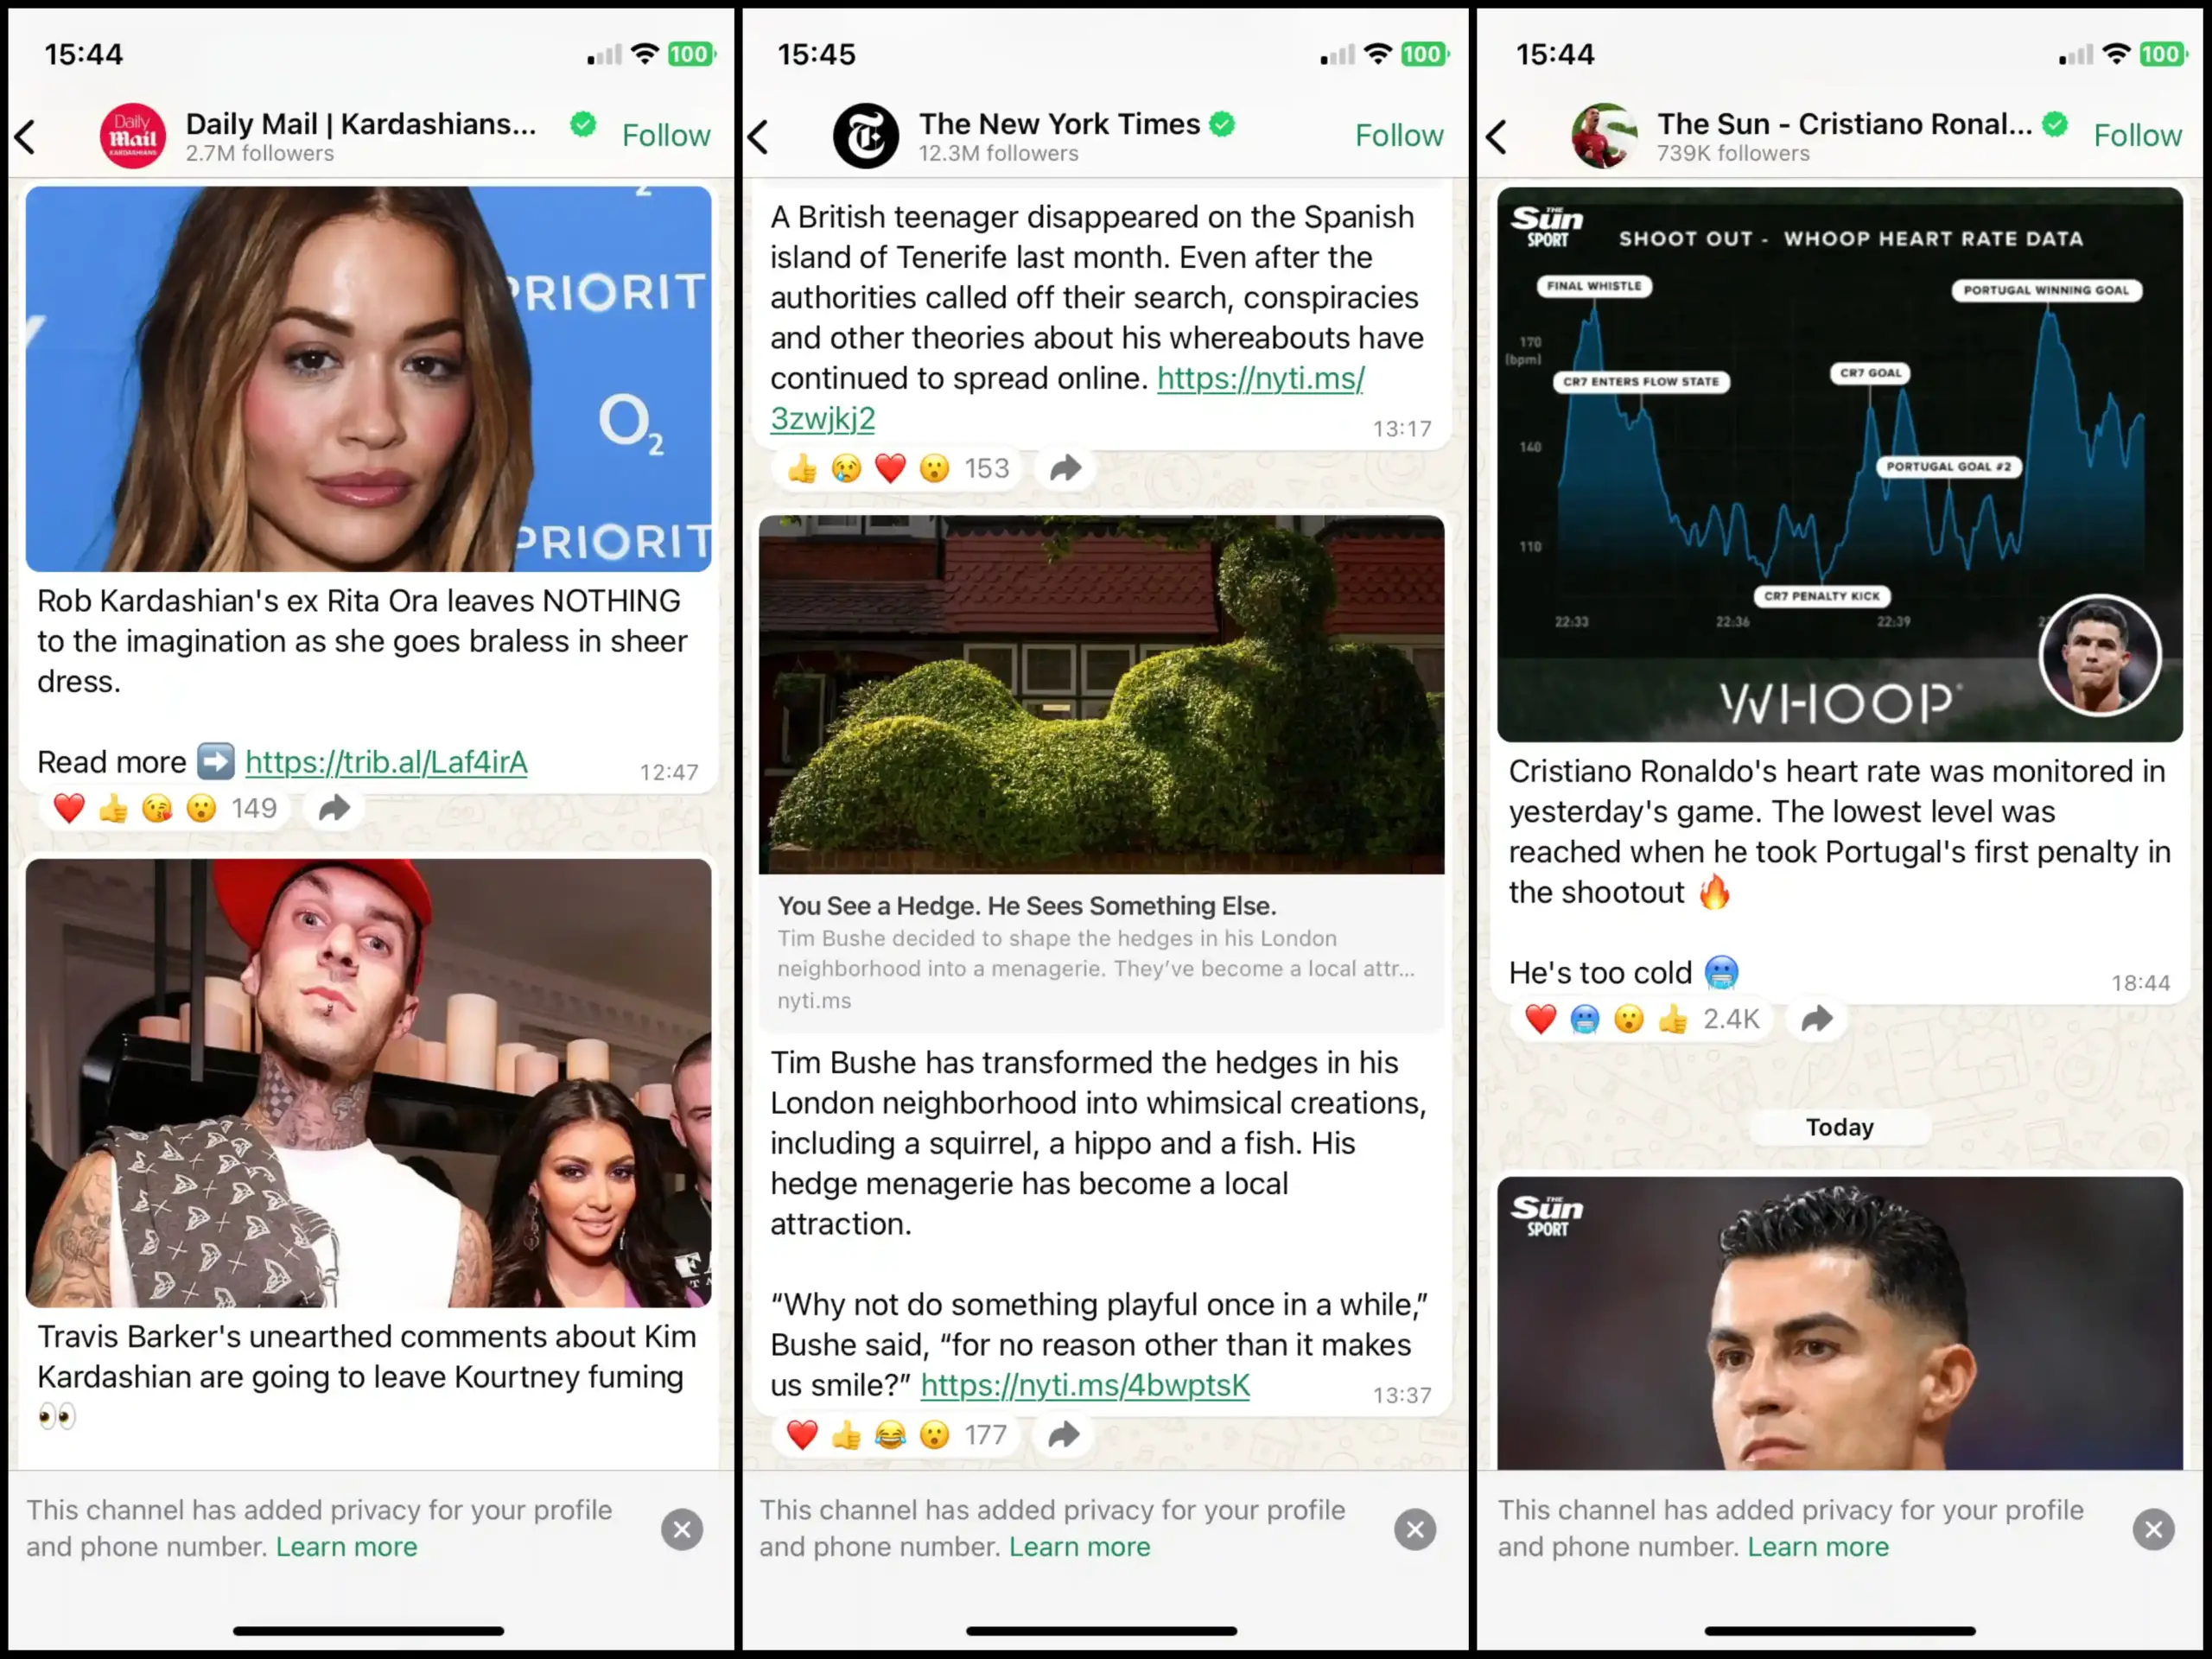 Whatsapp Channels one year on: Top news publishers ranked